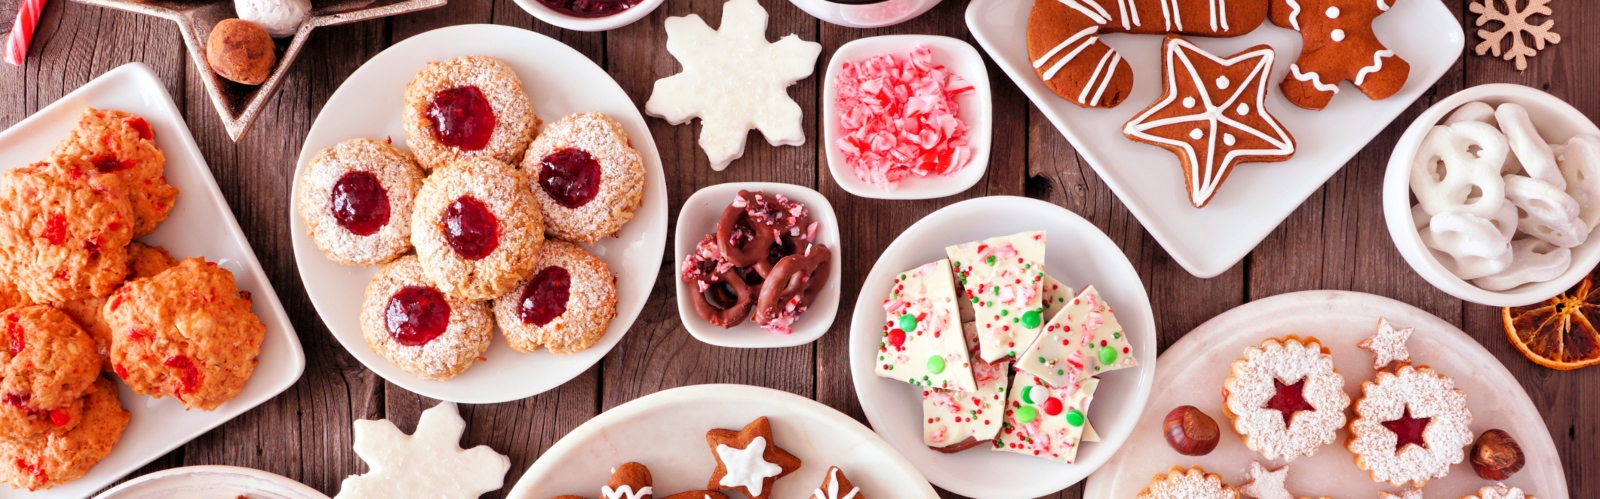 Christmas baked goods like gingerbread and mince pies spread out on a table